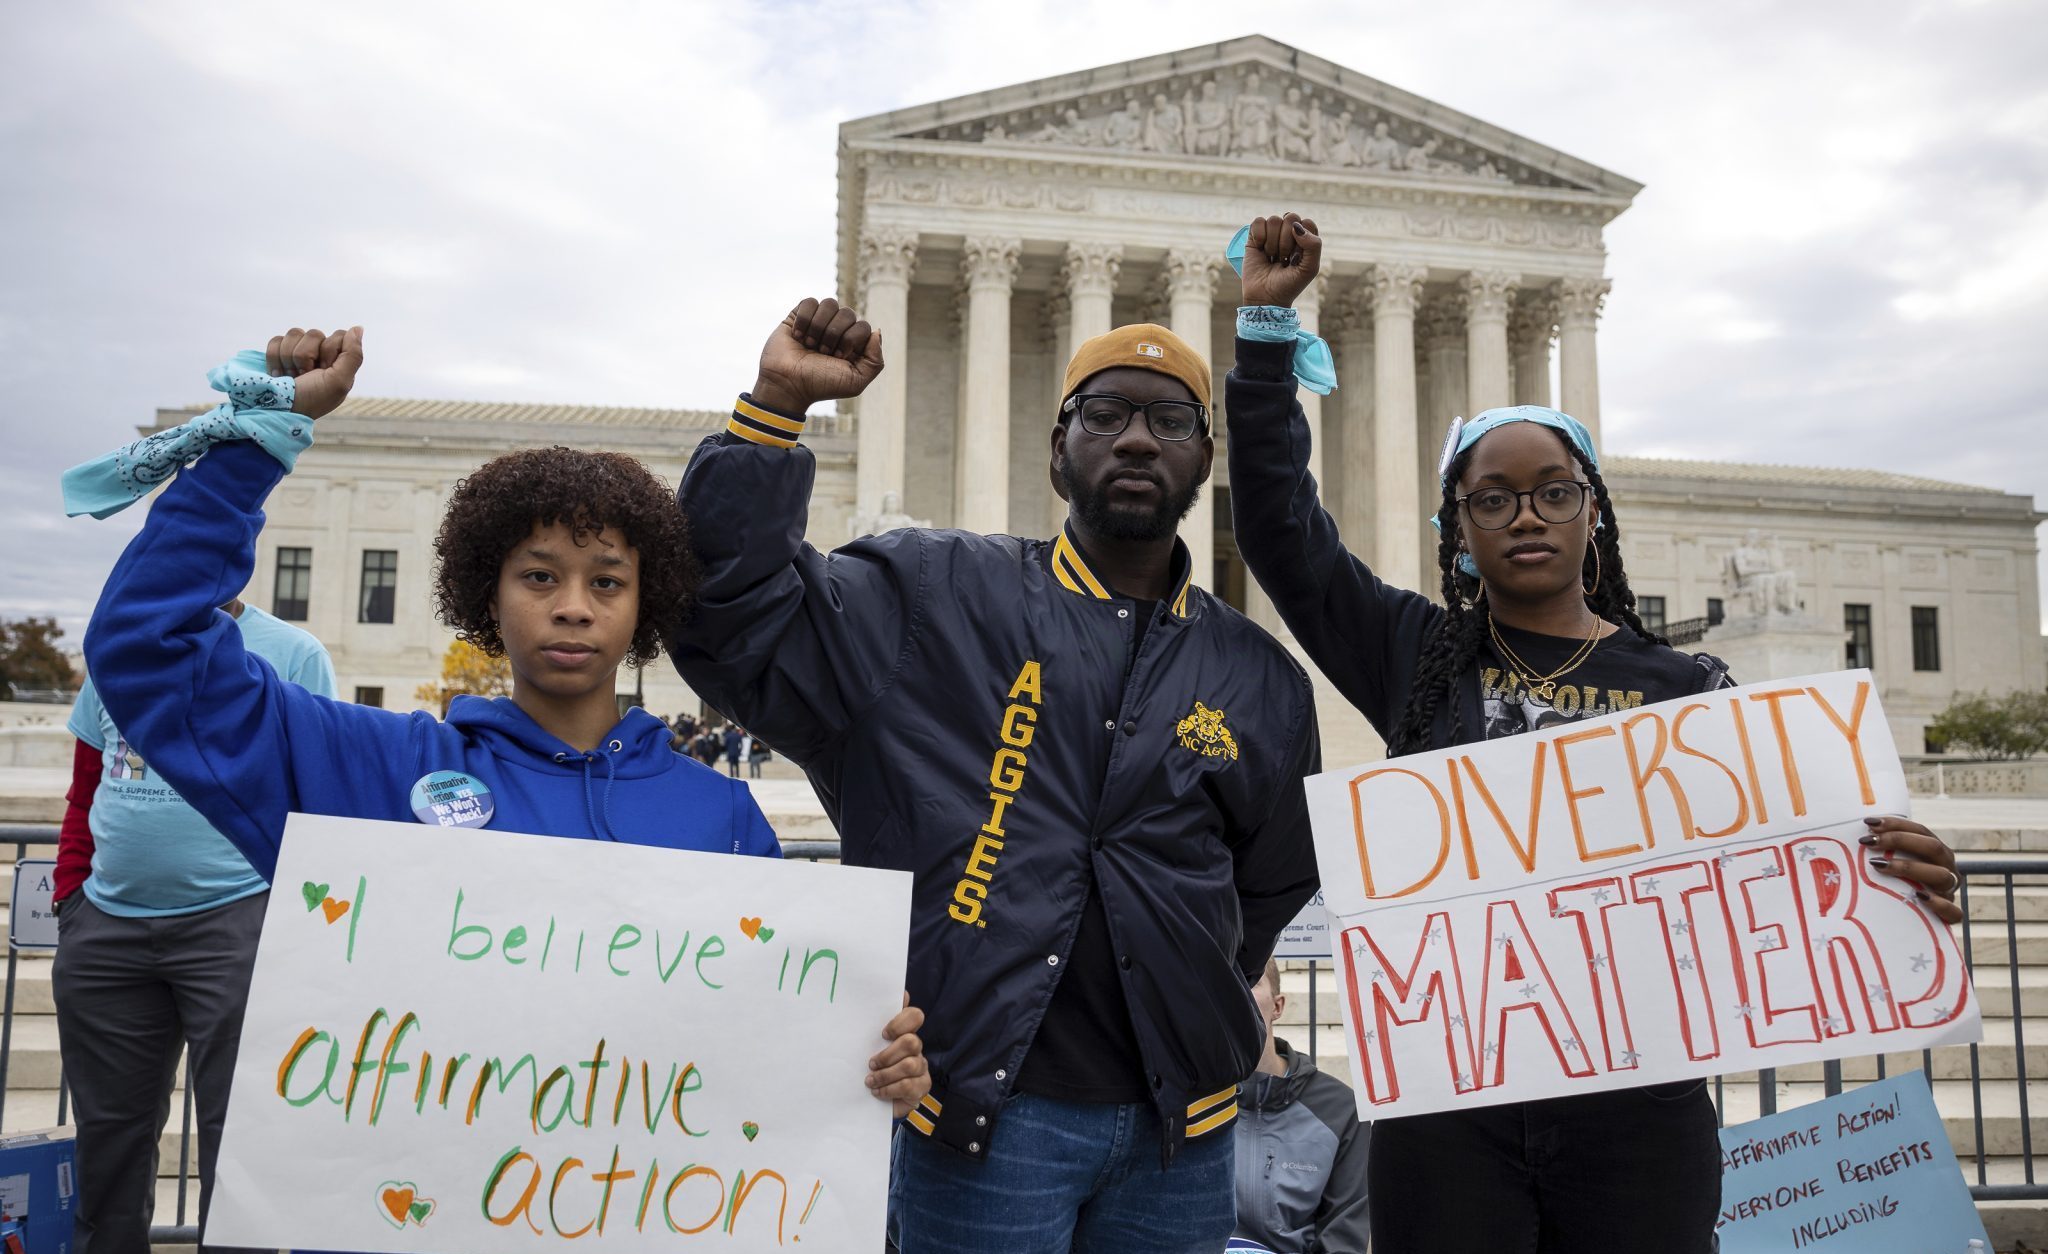 Affirmative action advocates rally outside the U.S. Supreme Court as justices heard oral arguments on two cases on whether colleges and universities can continue to consider race as a factor in admissions decisions. Credit: Francis Chung, E&E News/POLITICO via AP Images